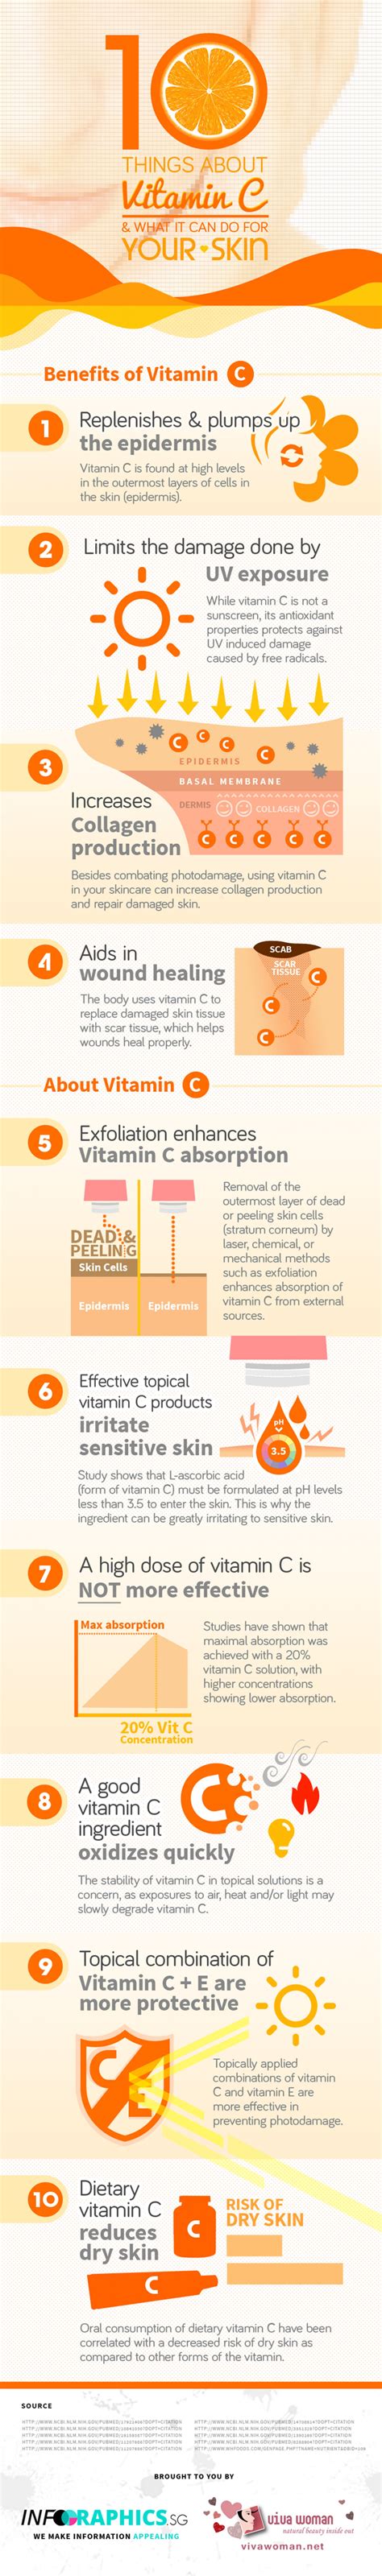 Here are some of the best benefits you can. 10 things about Vitamin C & what it can do for your skin ...